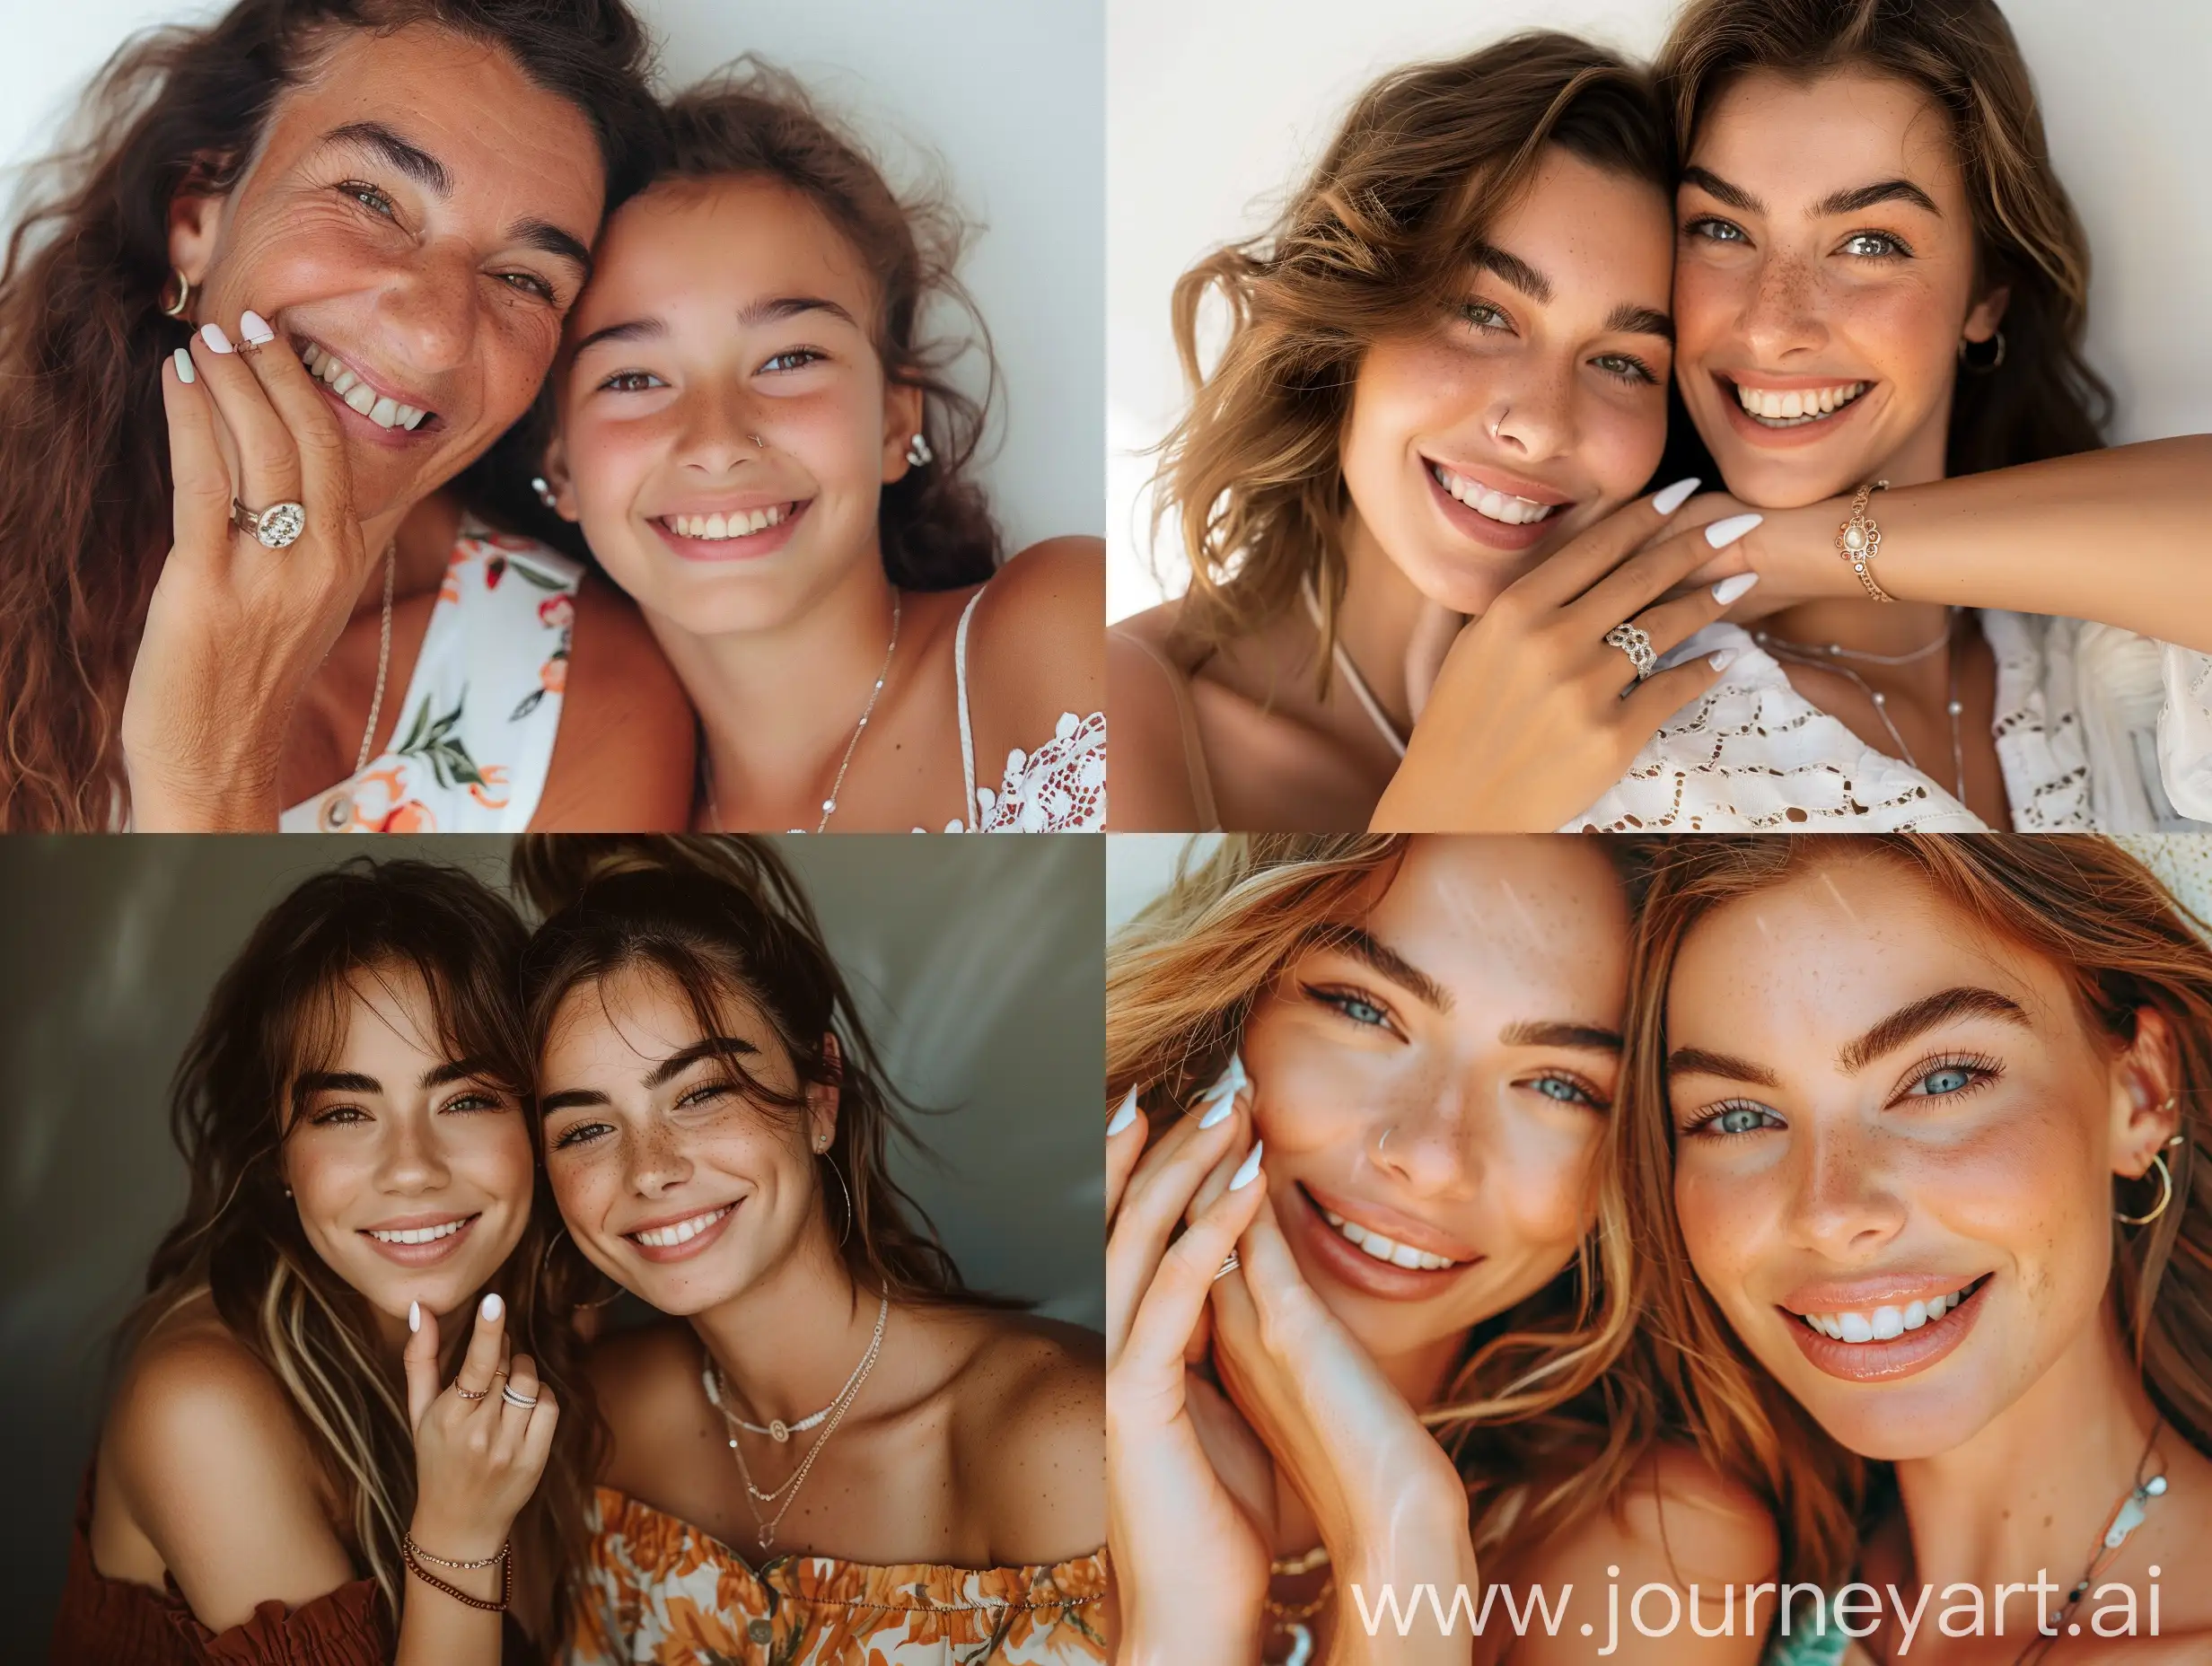 Mother-and-Daughter-Professional-Studio-Photoshoot-with-Smiling-Faces-and-Summer-Fashion